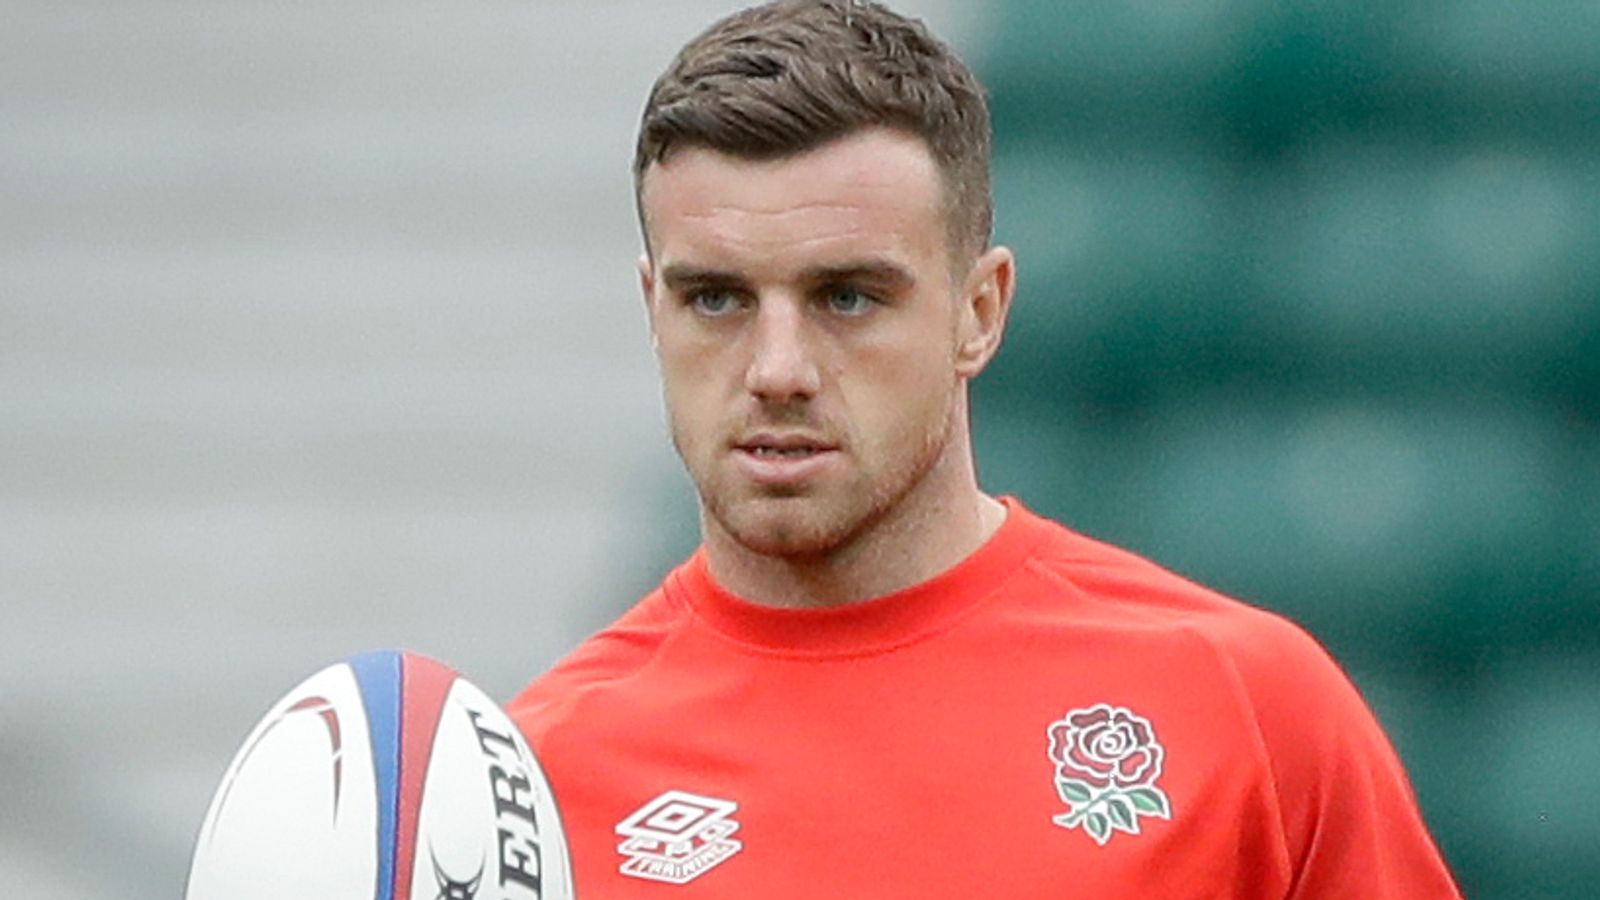 Six Nations 2022: George Ford and Elliot Daly recalled to England squad - Sky Sports